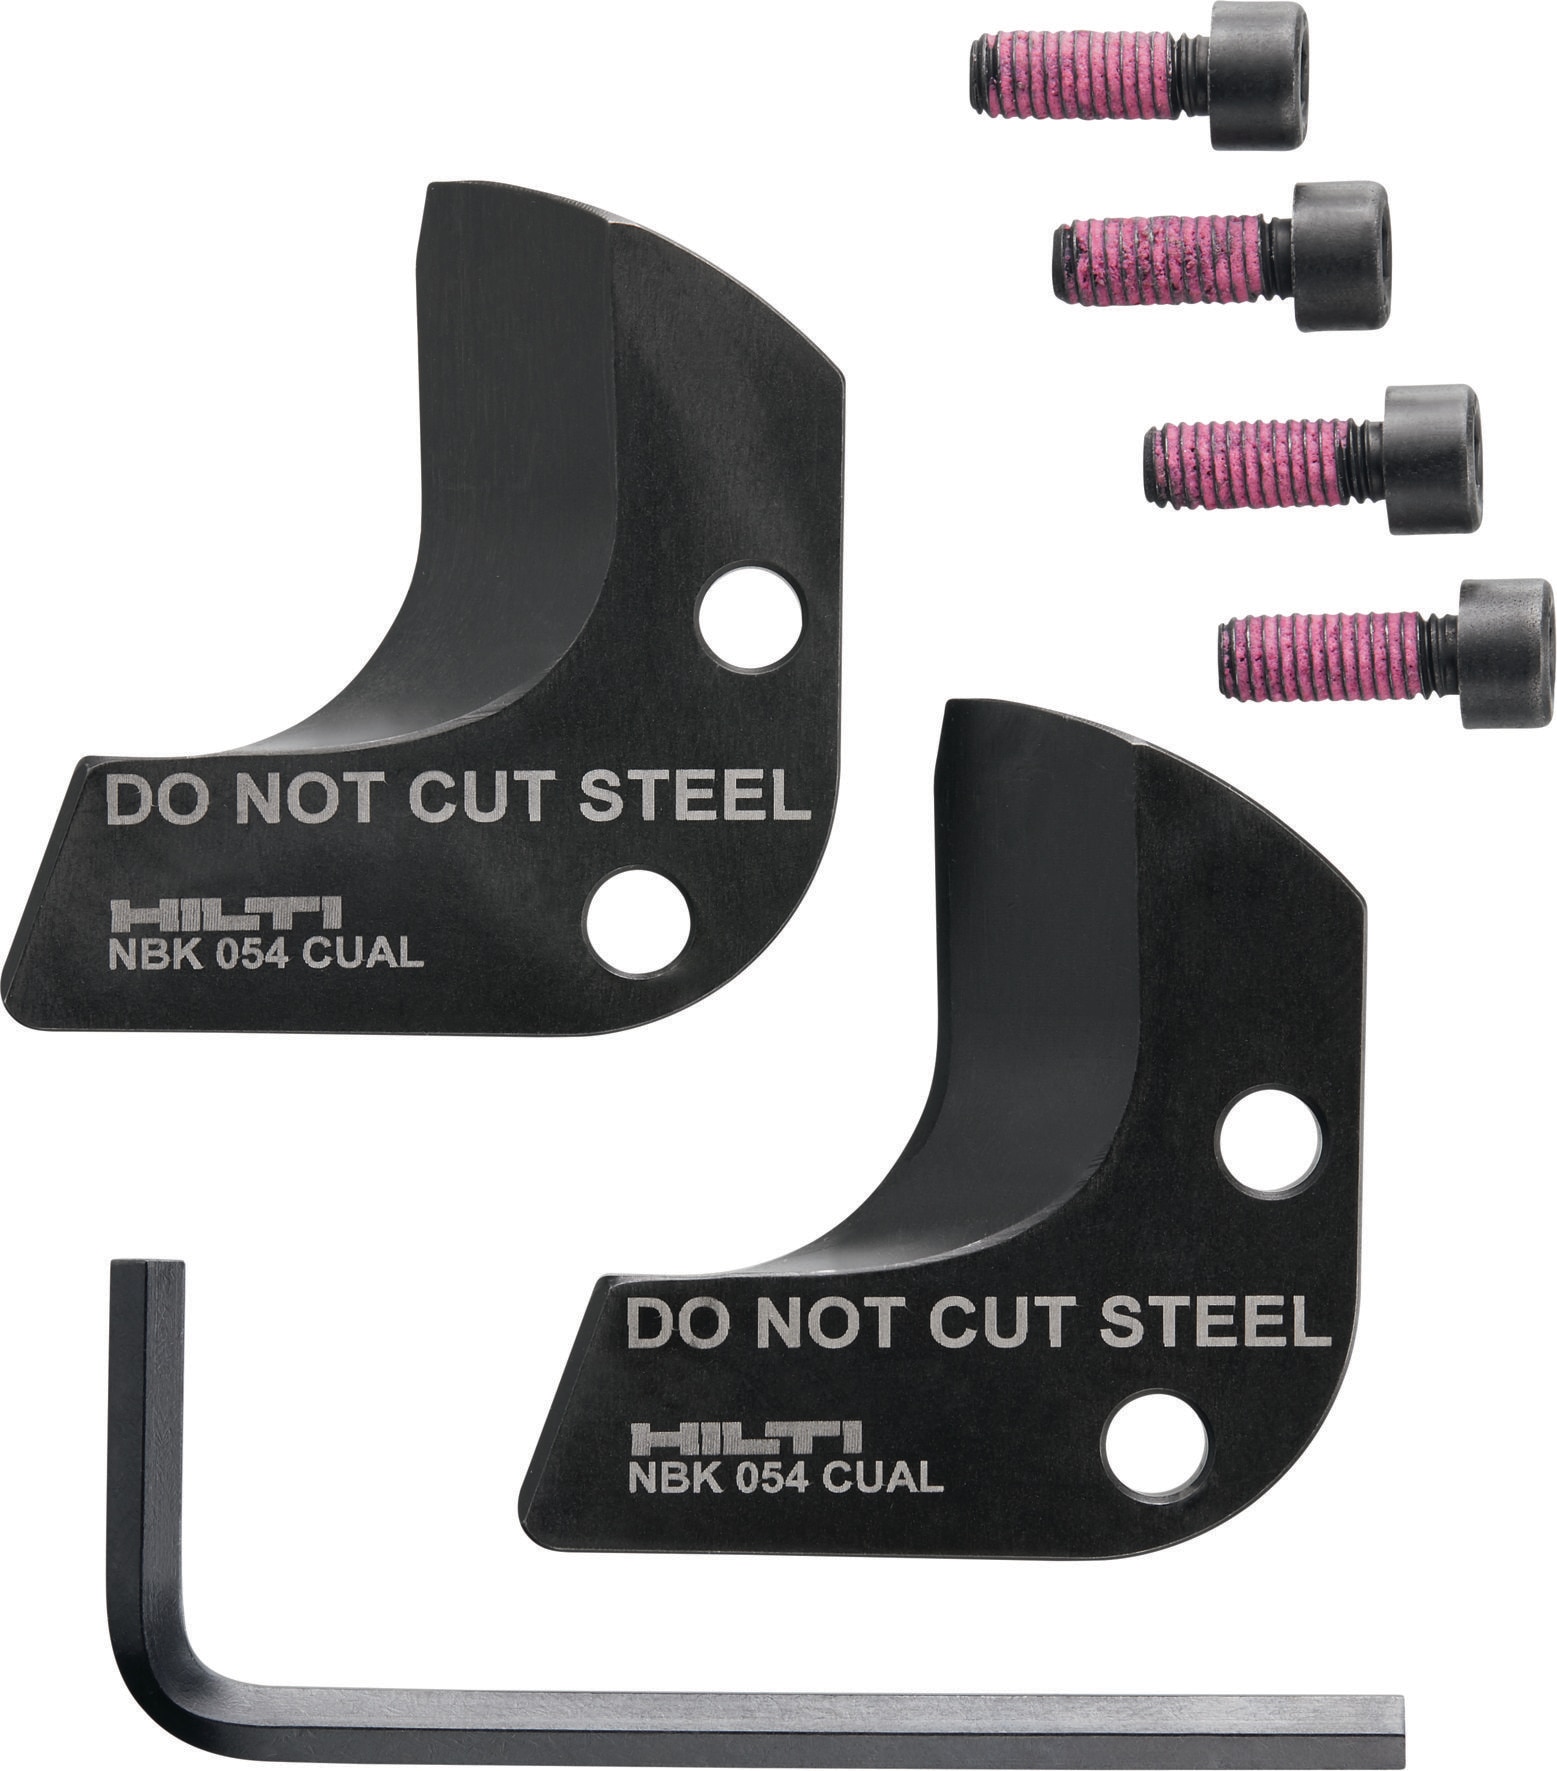 Cable cutter blade kits - Inserts for pressing, crimping & cutting - Hilti  